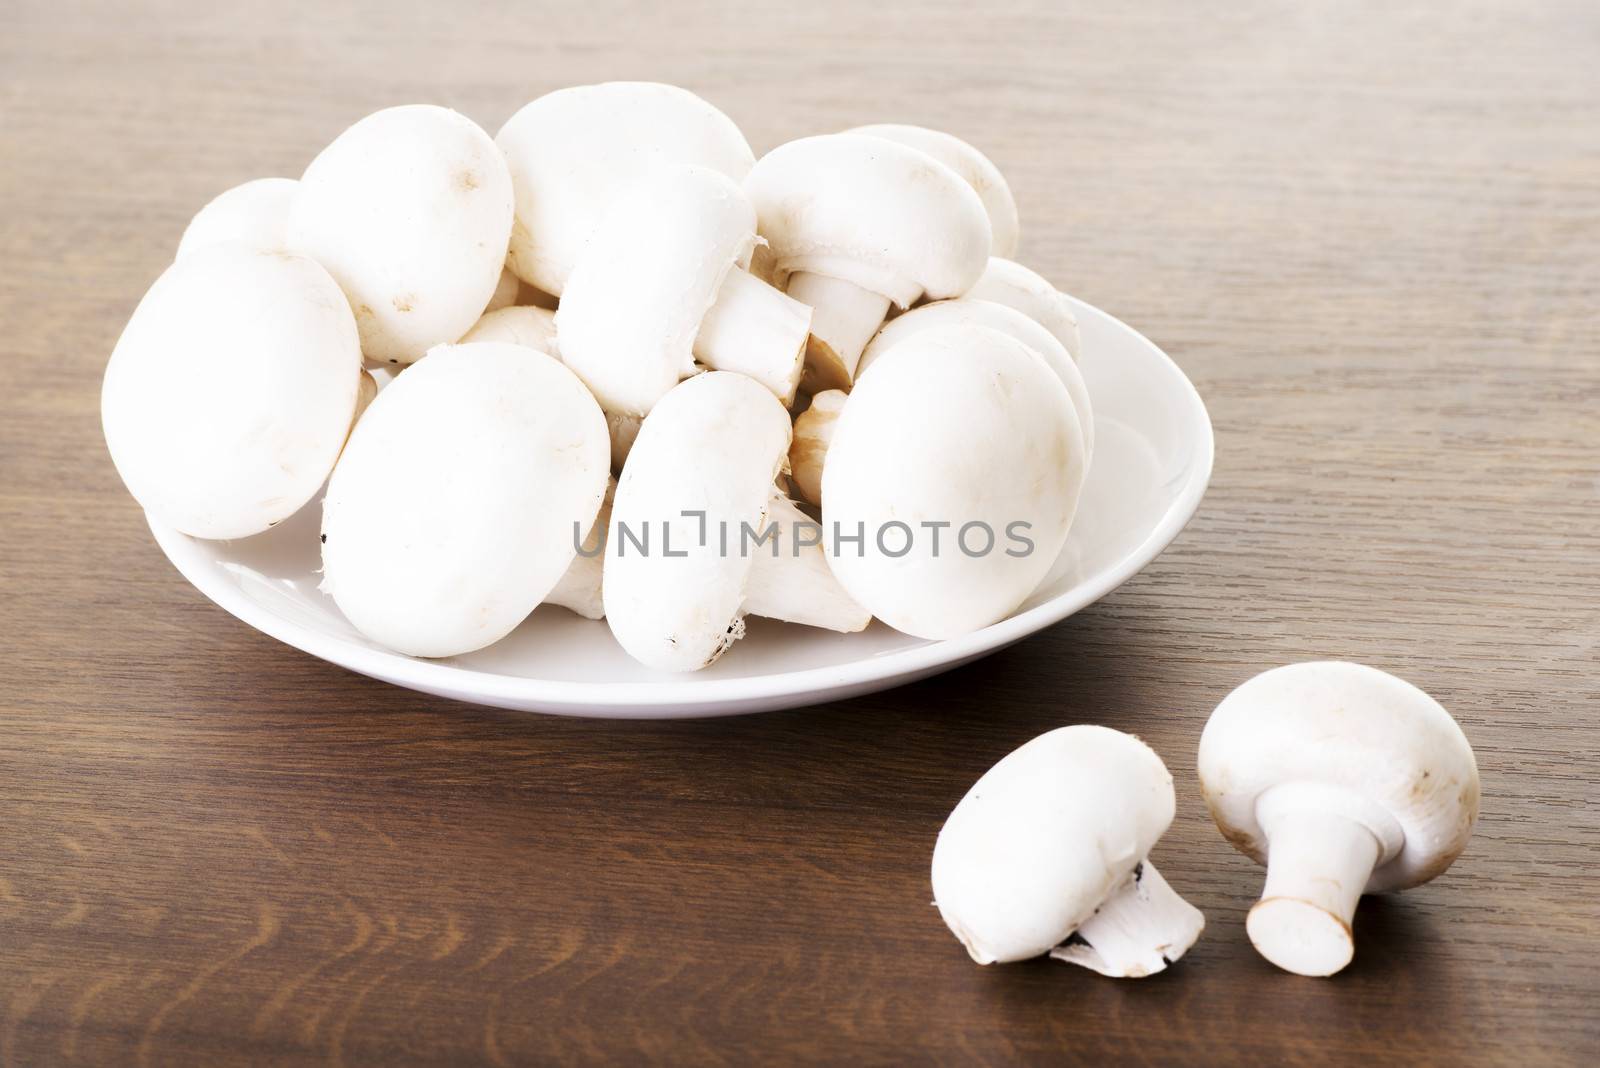 Fresh raw mashroom lying on a plate. Over wooden background.